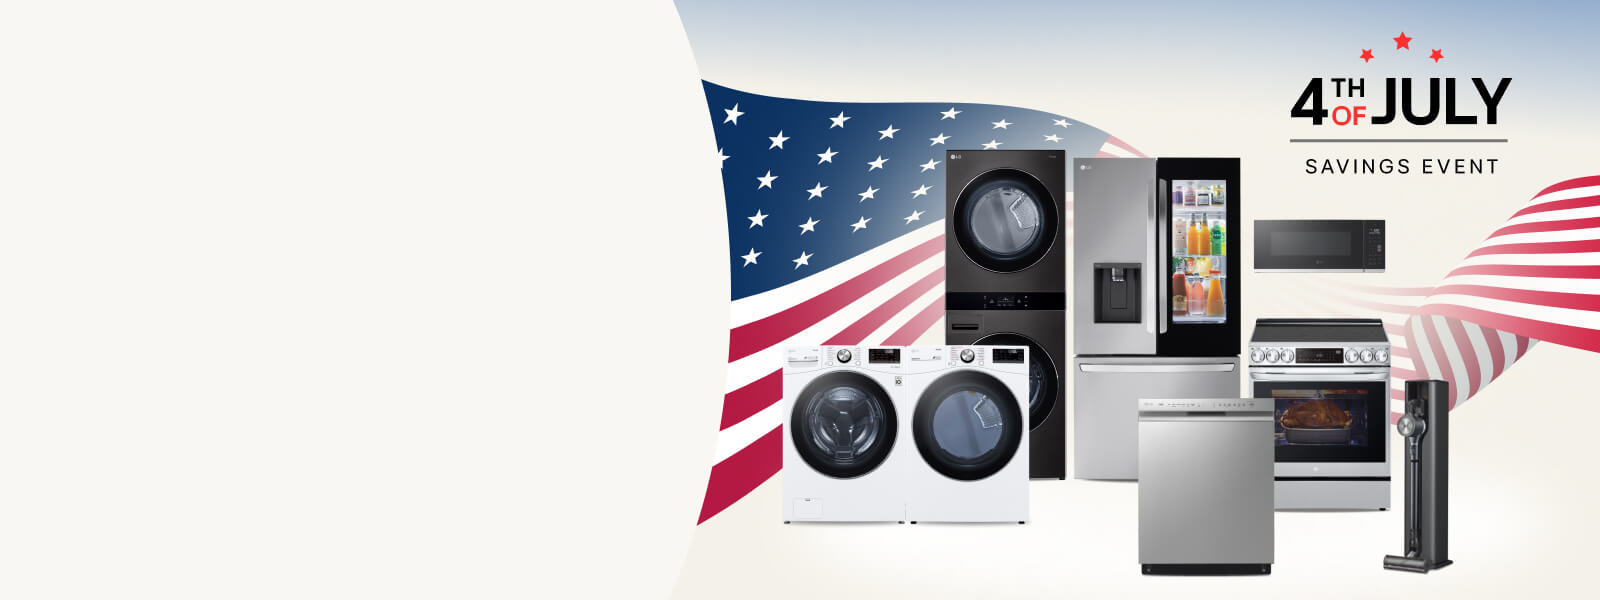 Celebrate Independence Day with savings starting at 30 percent image for desktop